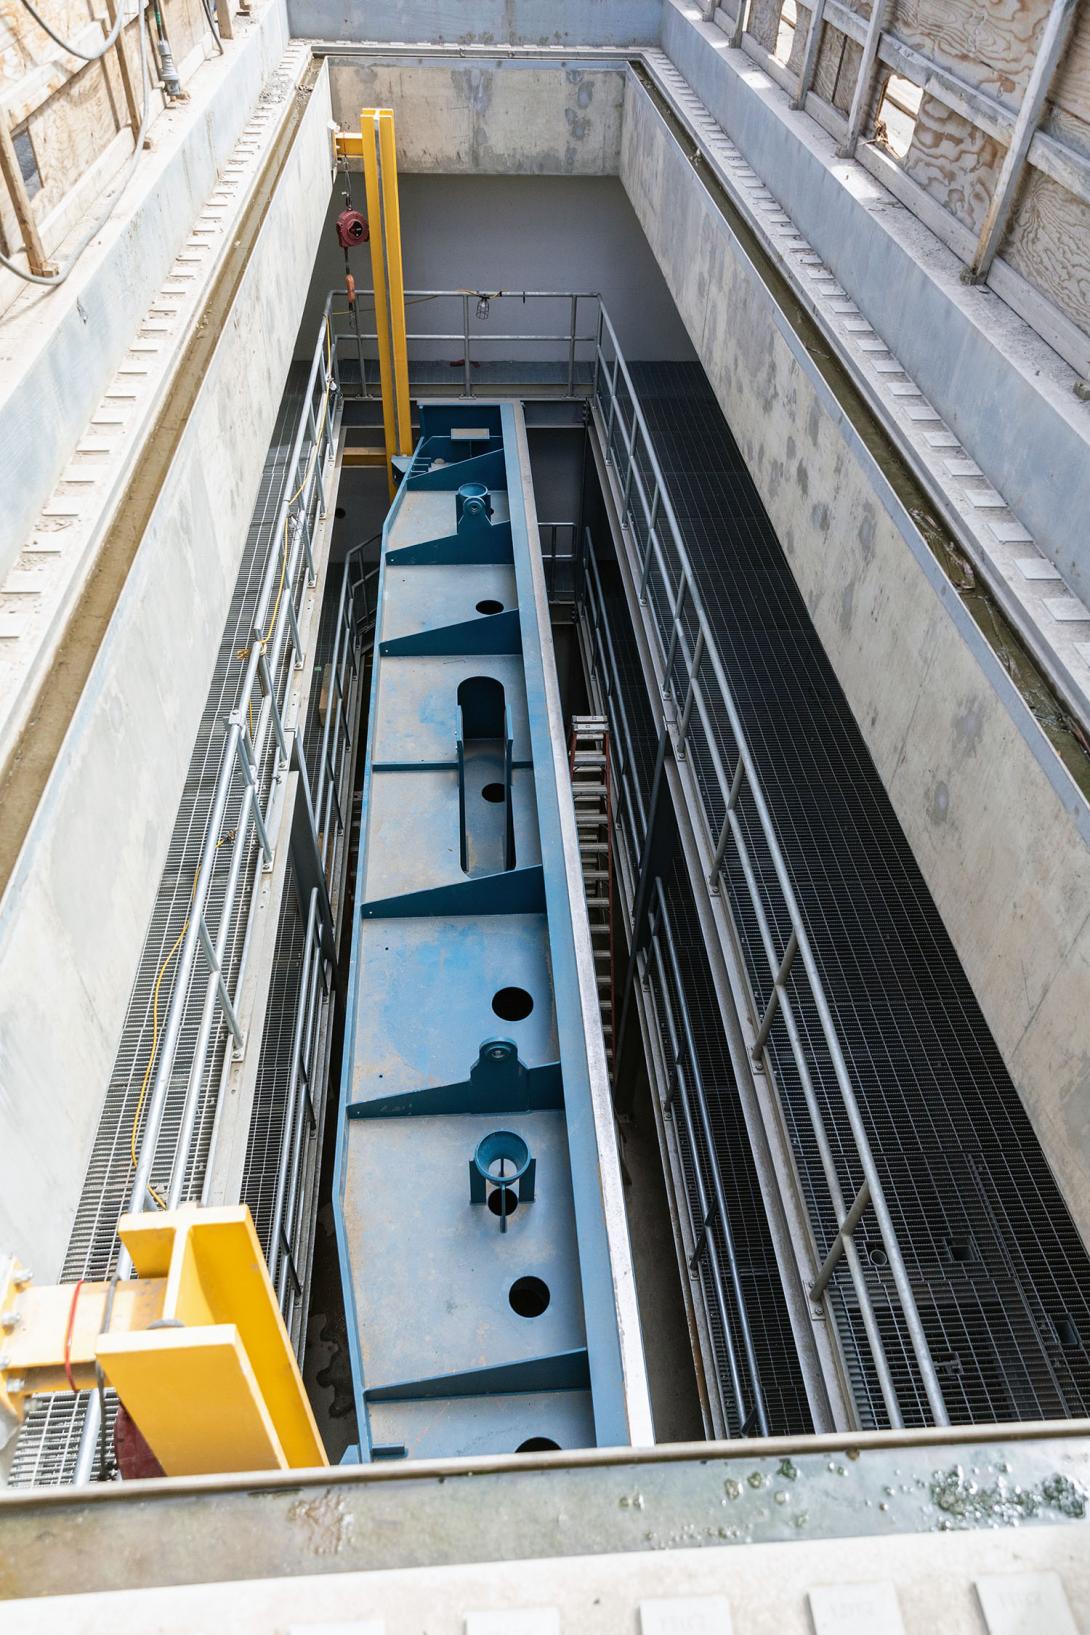 One of six intake gates inserted in the storage chamber above the gate. The gate closes the entrance to the penstock for maintenance by stopping the flow of water from the approach channel. | May 2023